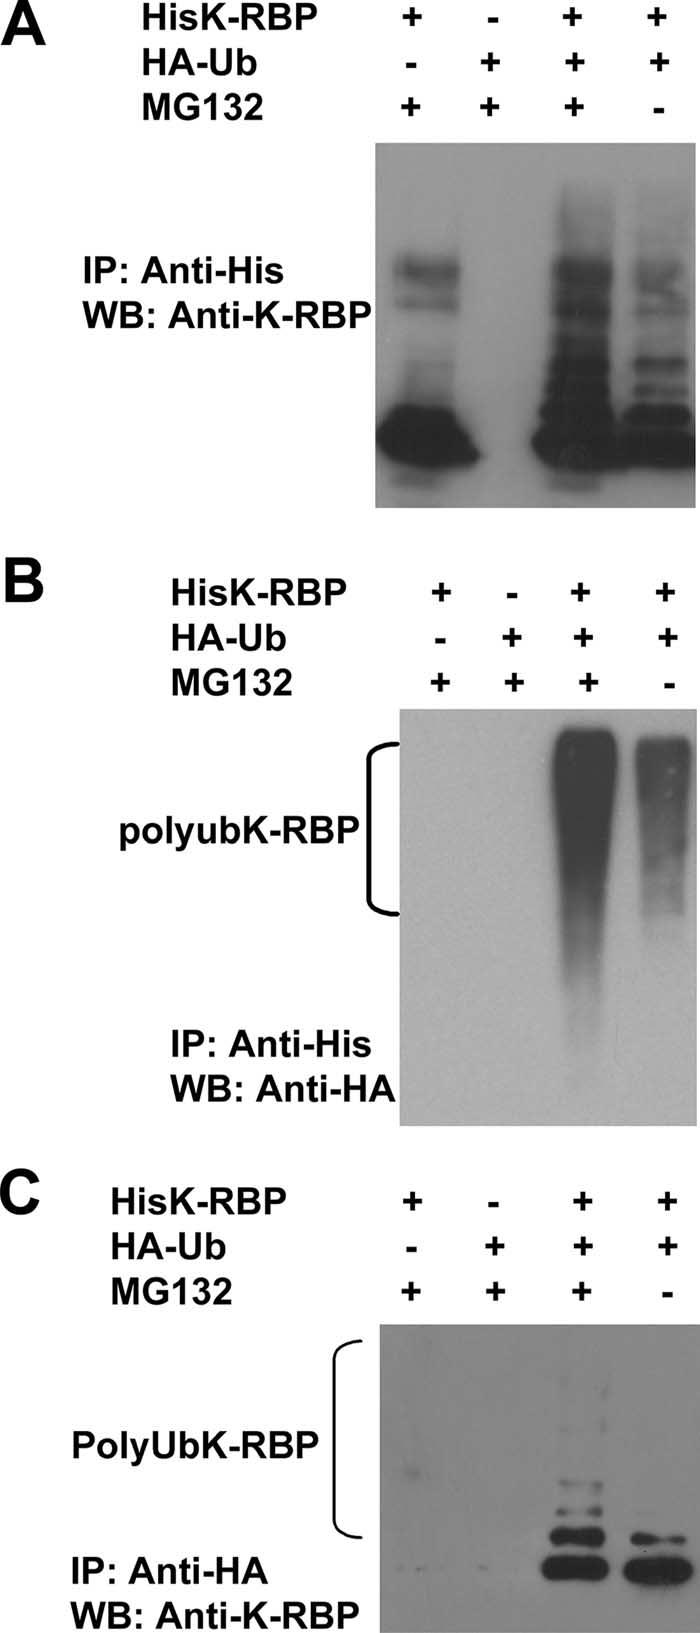 The cell lysates were prepared and immunoblotted with anti-k-rbp (top), anti-rta (middle), or anti- -tubulin (bottom) antibodies.